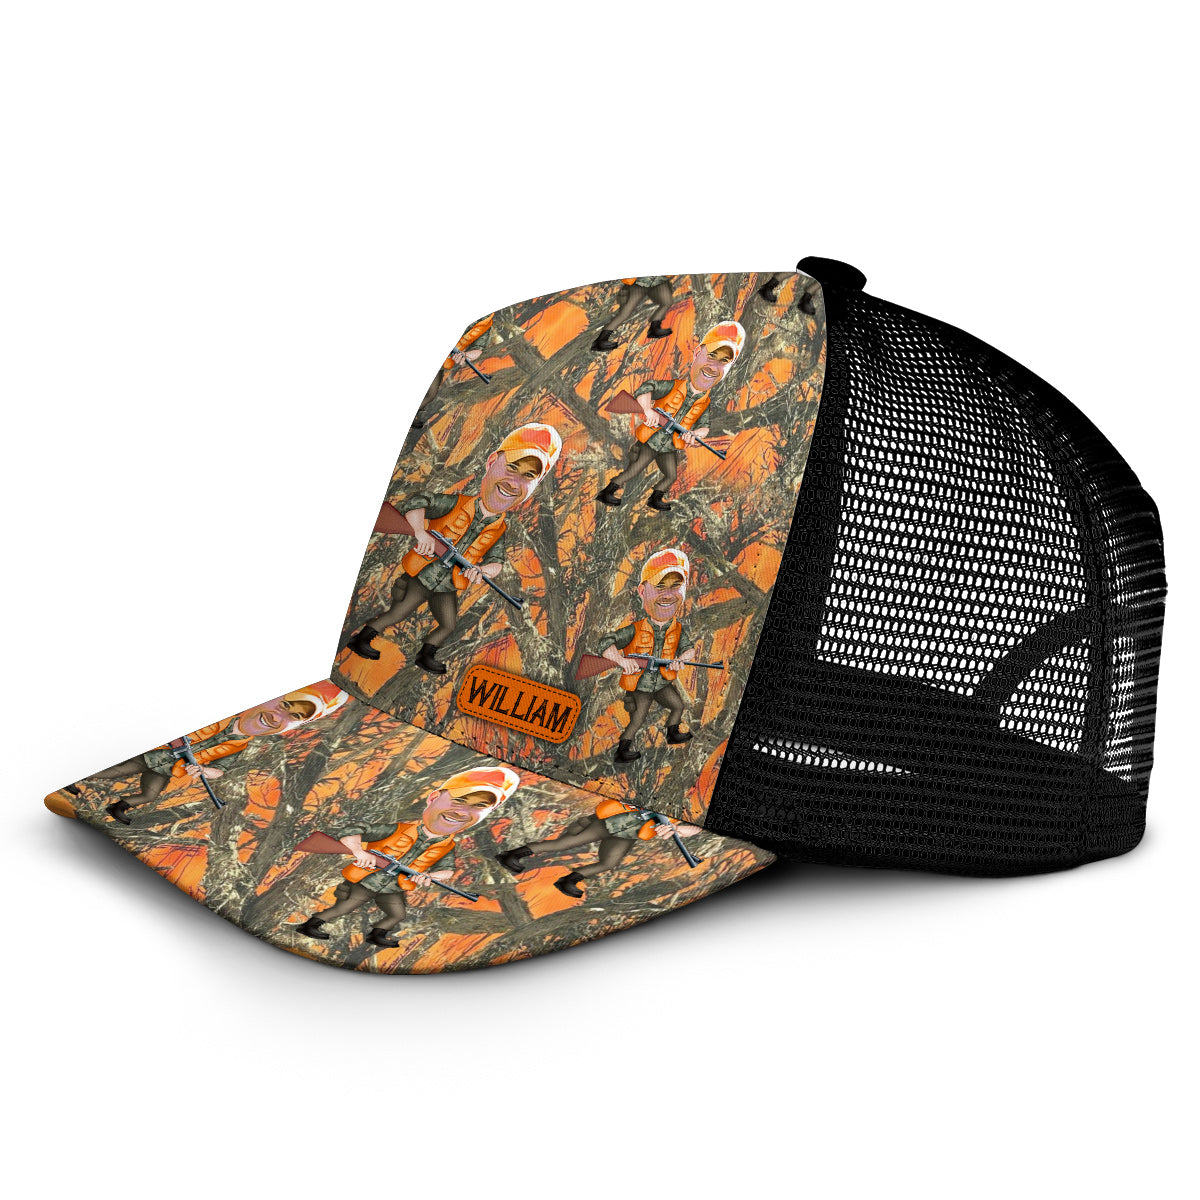 Photo Inserted Hunter - Personalized Hunting Trucker Hat